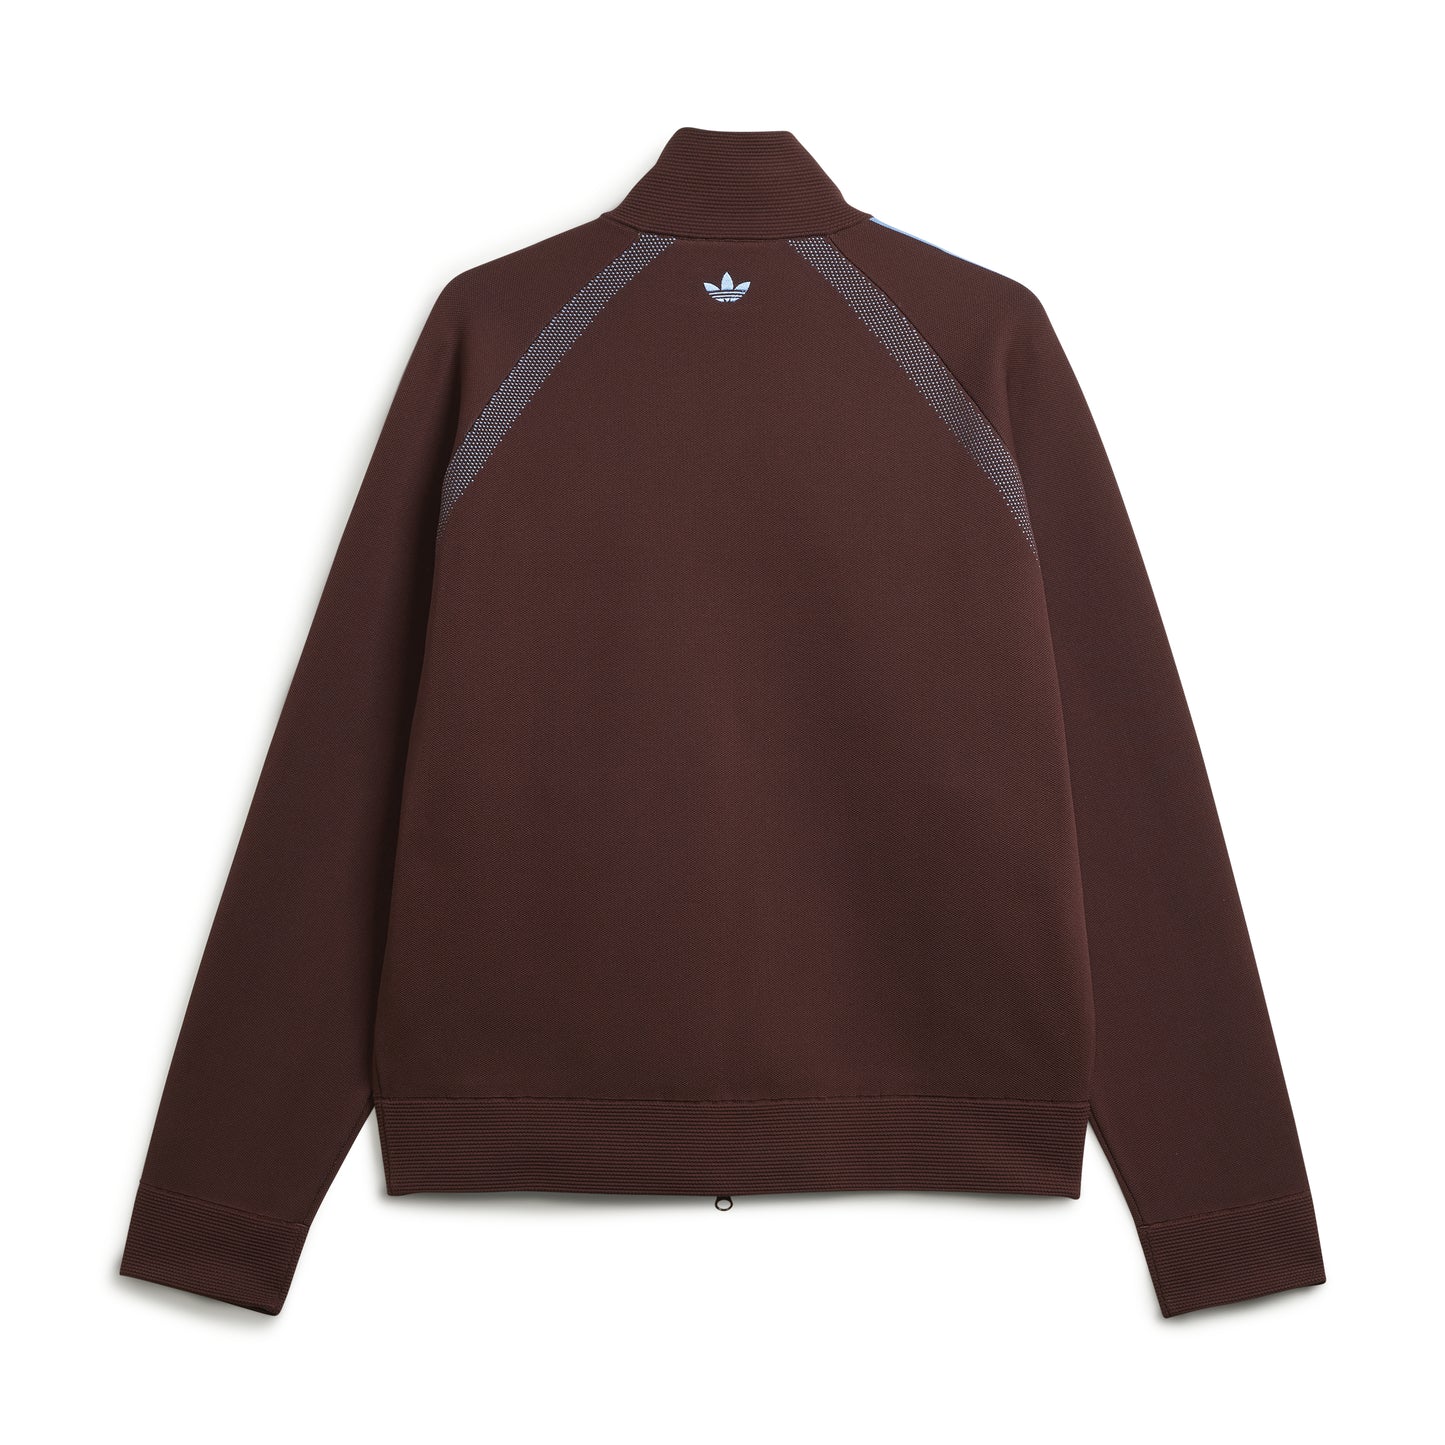 adidas x wales bonner track jacket (mystery brown)